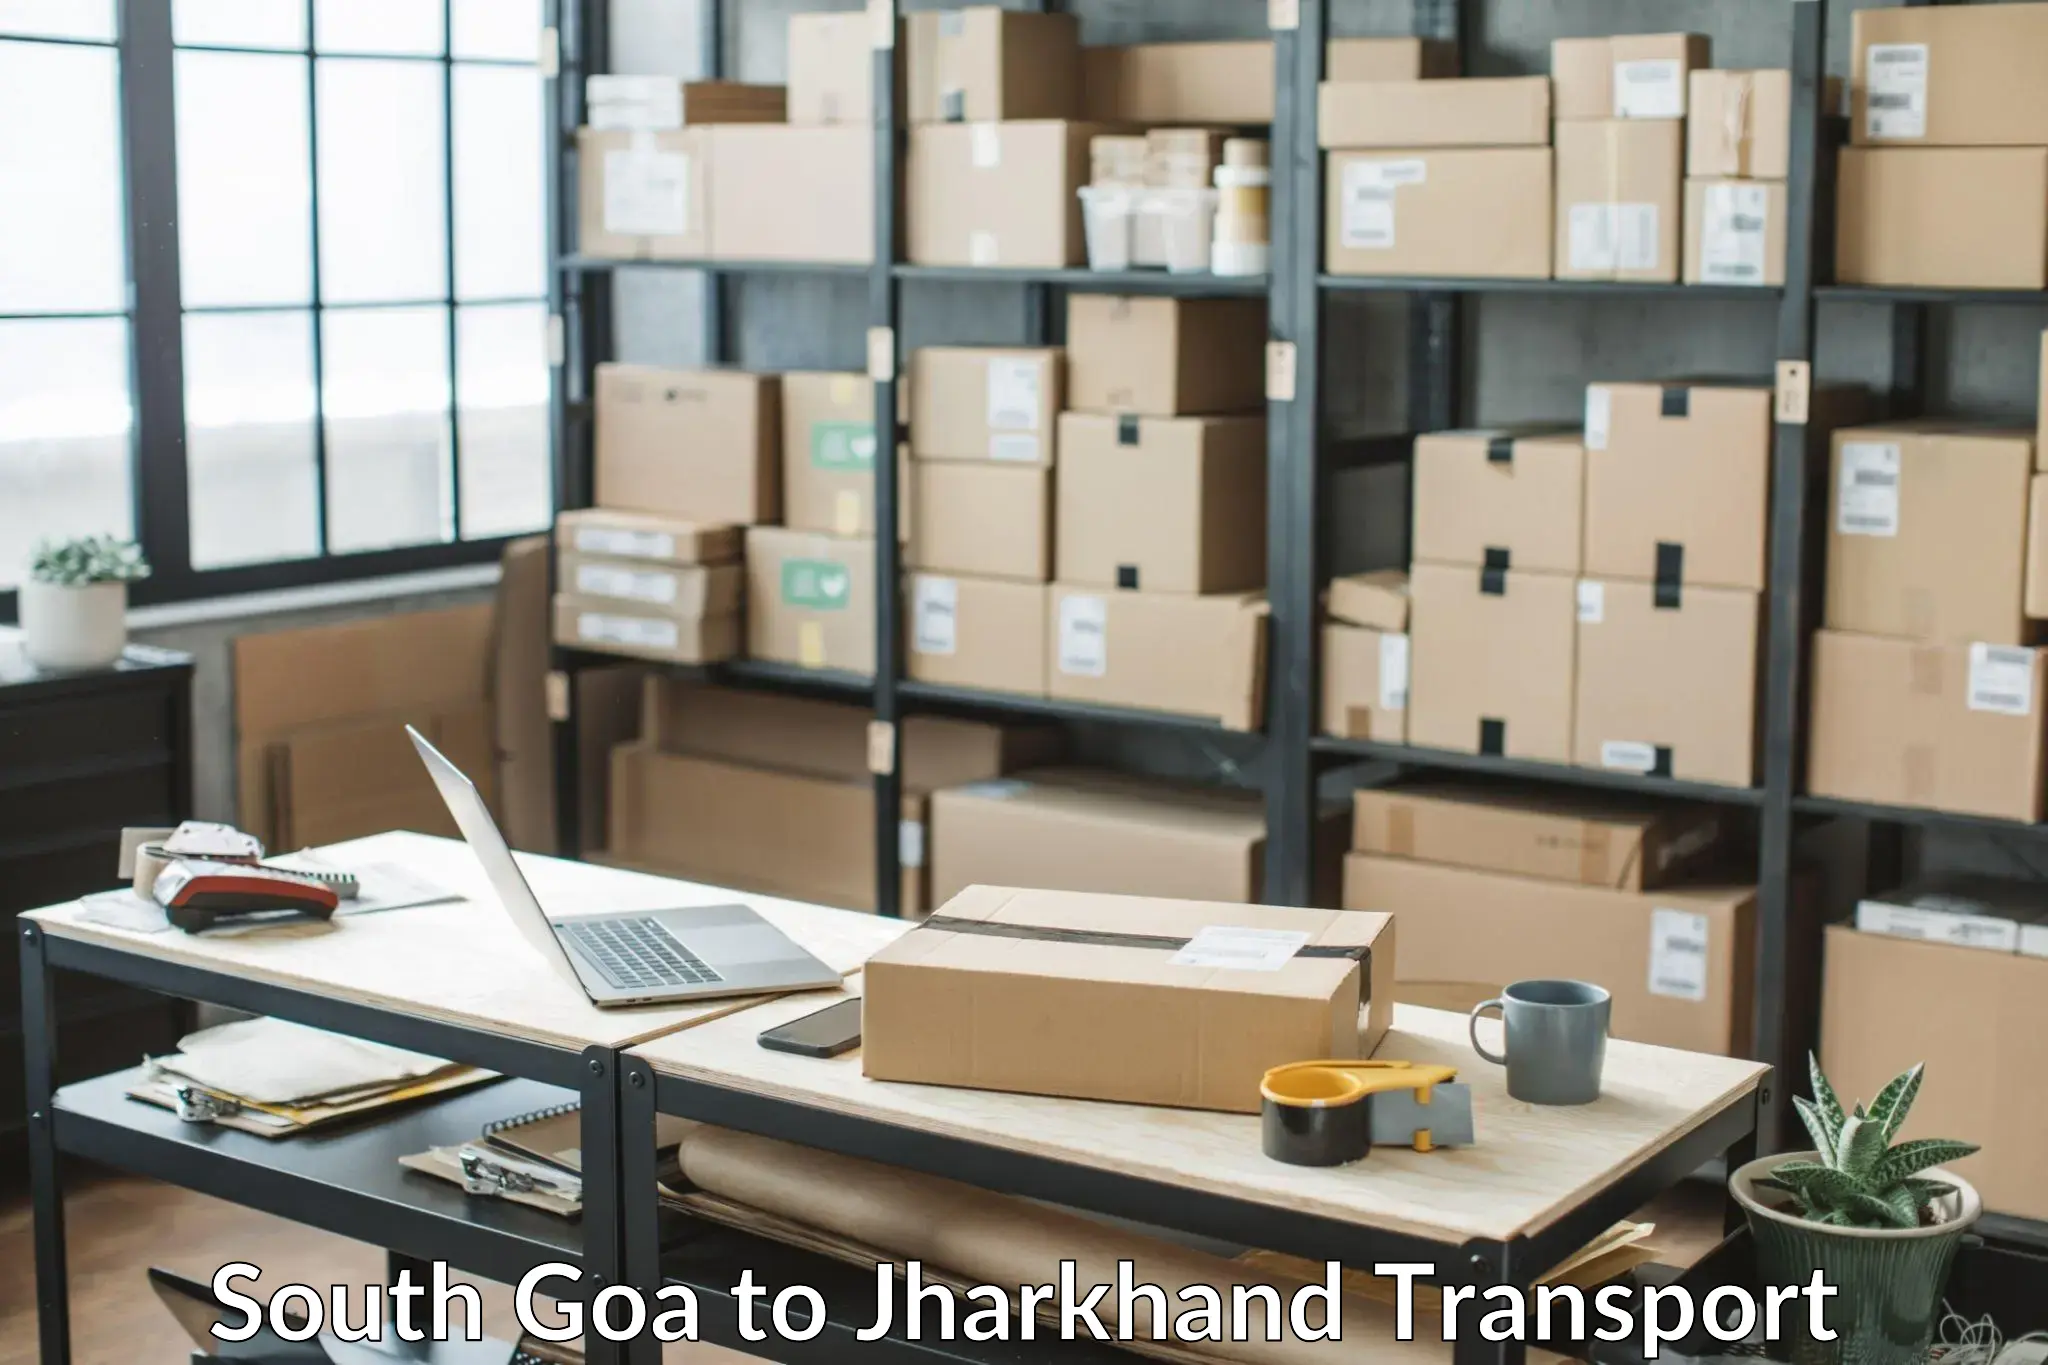 Delivery service South Goa to IIT Dhanbad